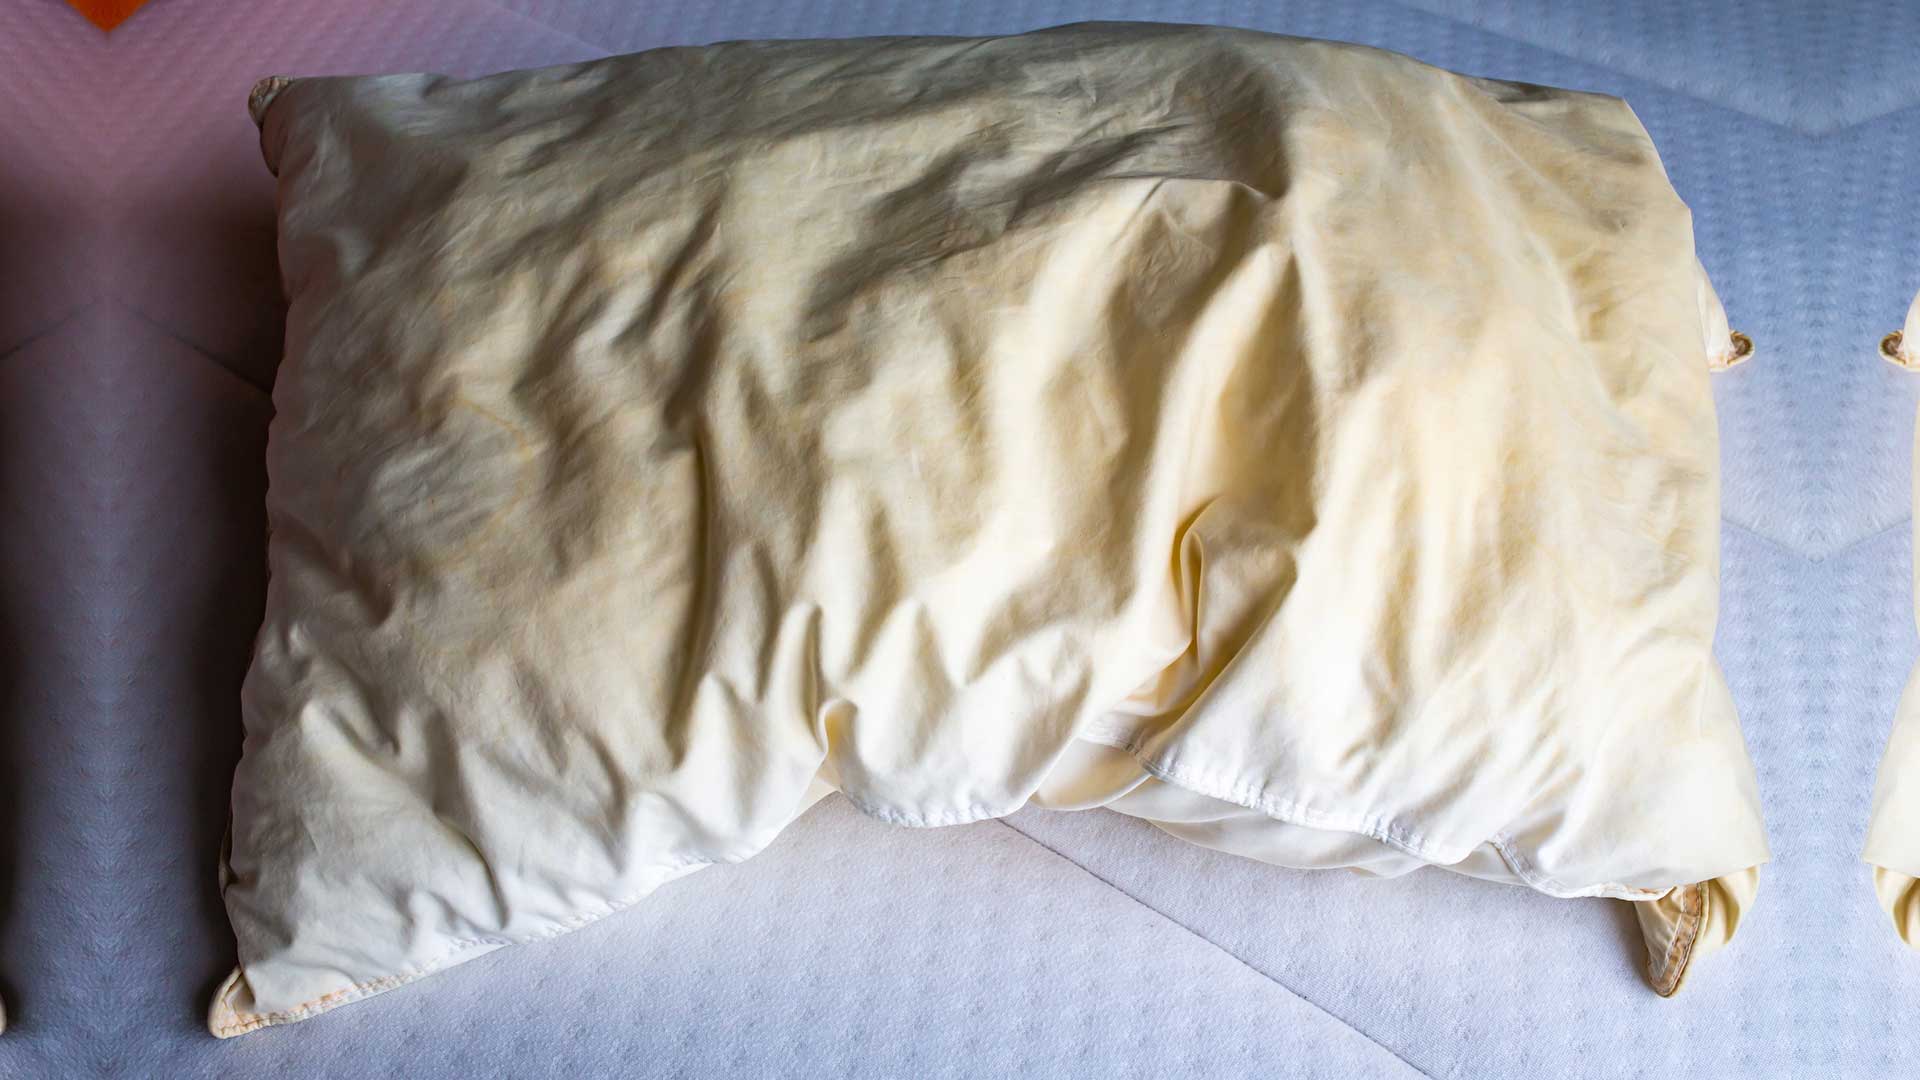 The Internet Debates: Is Sleeping on Stained Pillows Okay or Not?